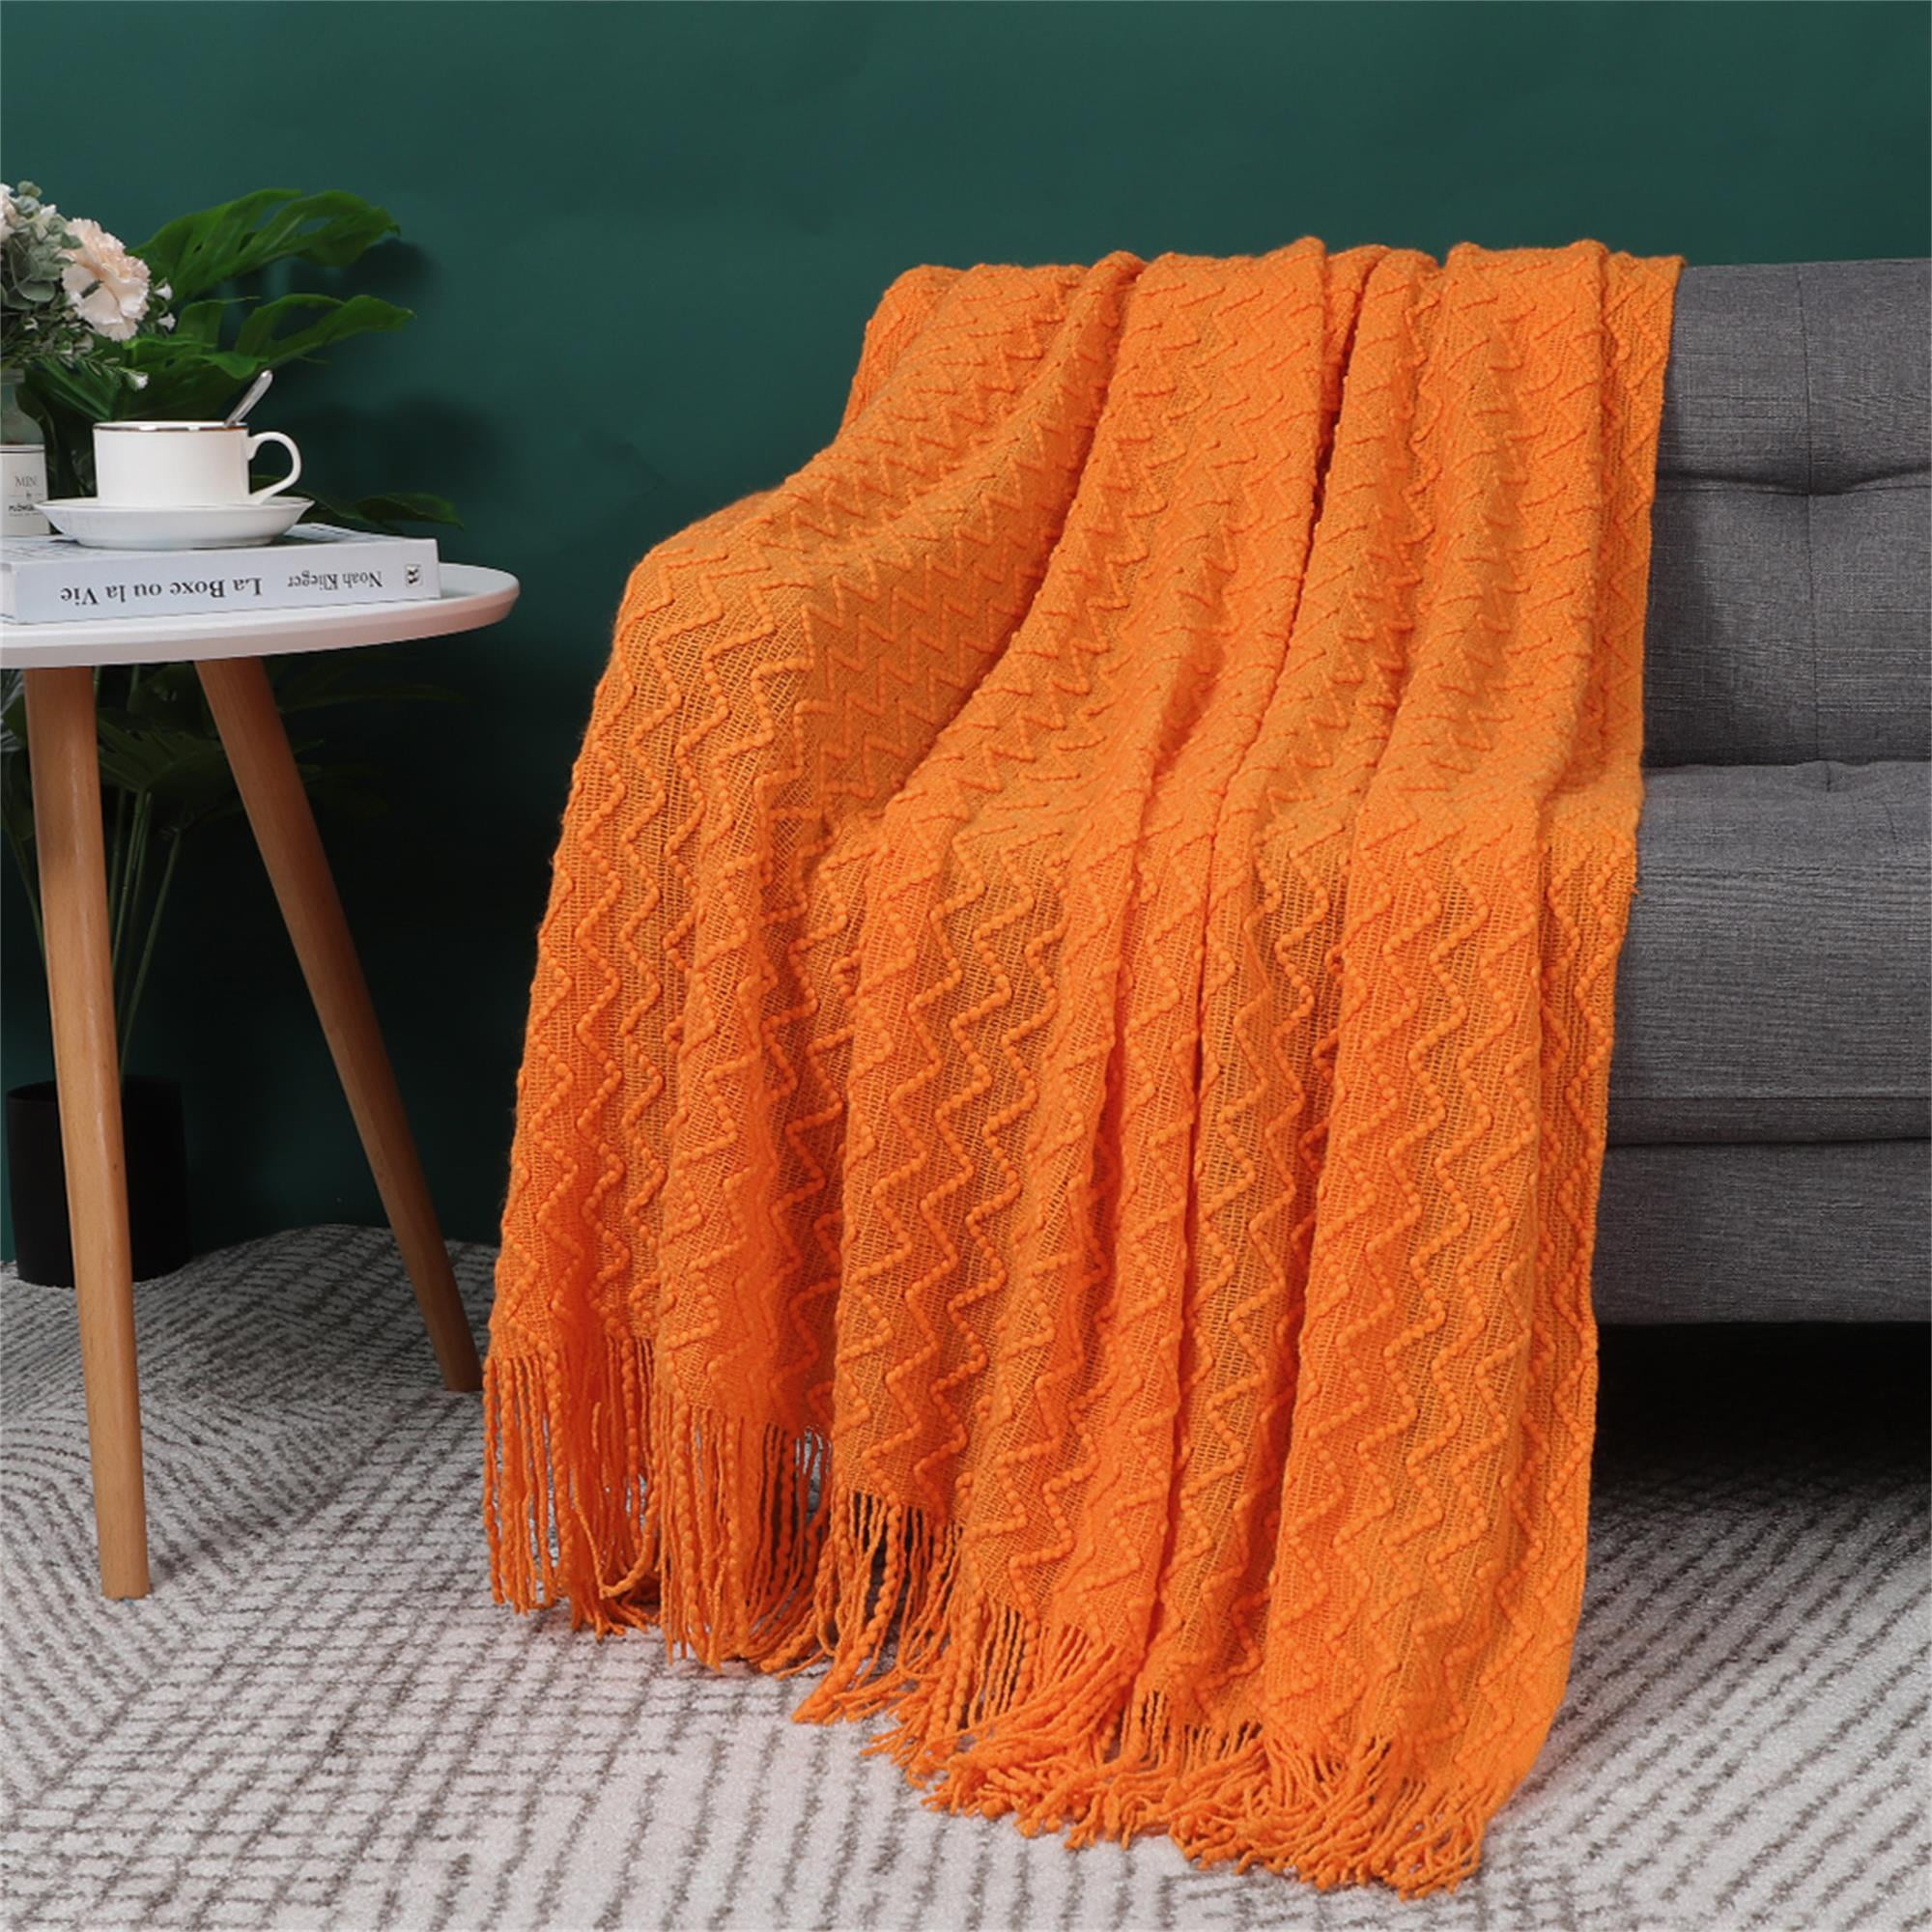 PiccoCasa 100% Acrylic Knit Throw Blanket Wave Pattern Soft Lightweight Decors Knitted Blanket with Tassels Fringe for Couch Sofa 50x60 Inch Ginger Bed Travel